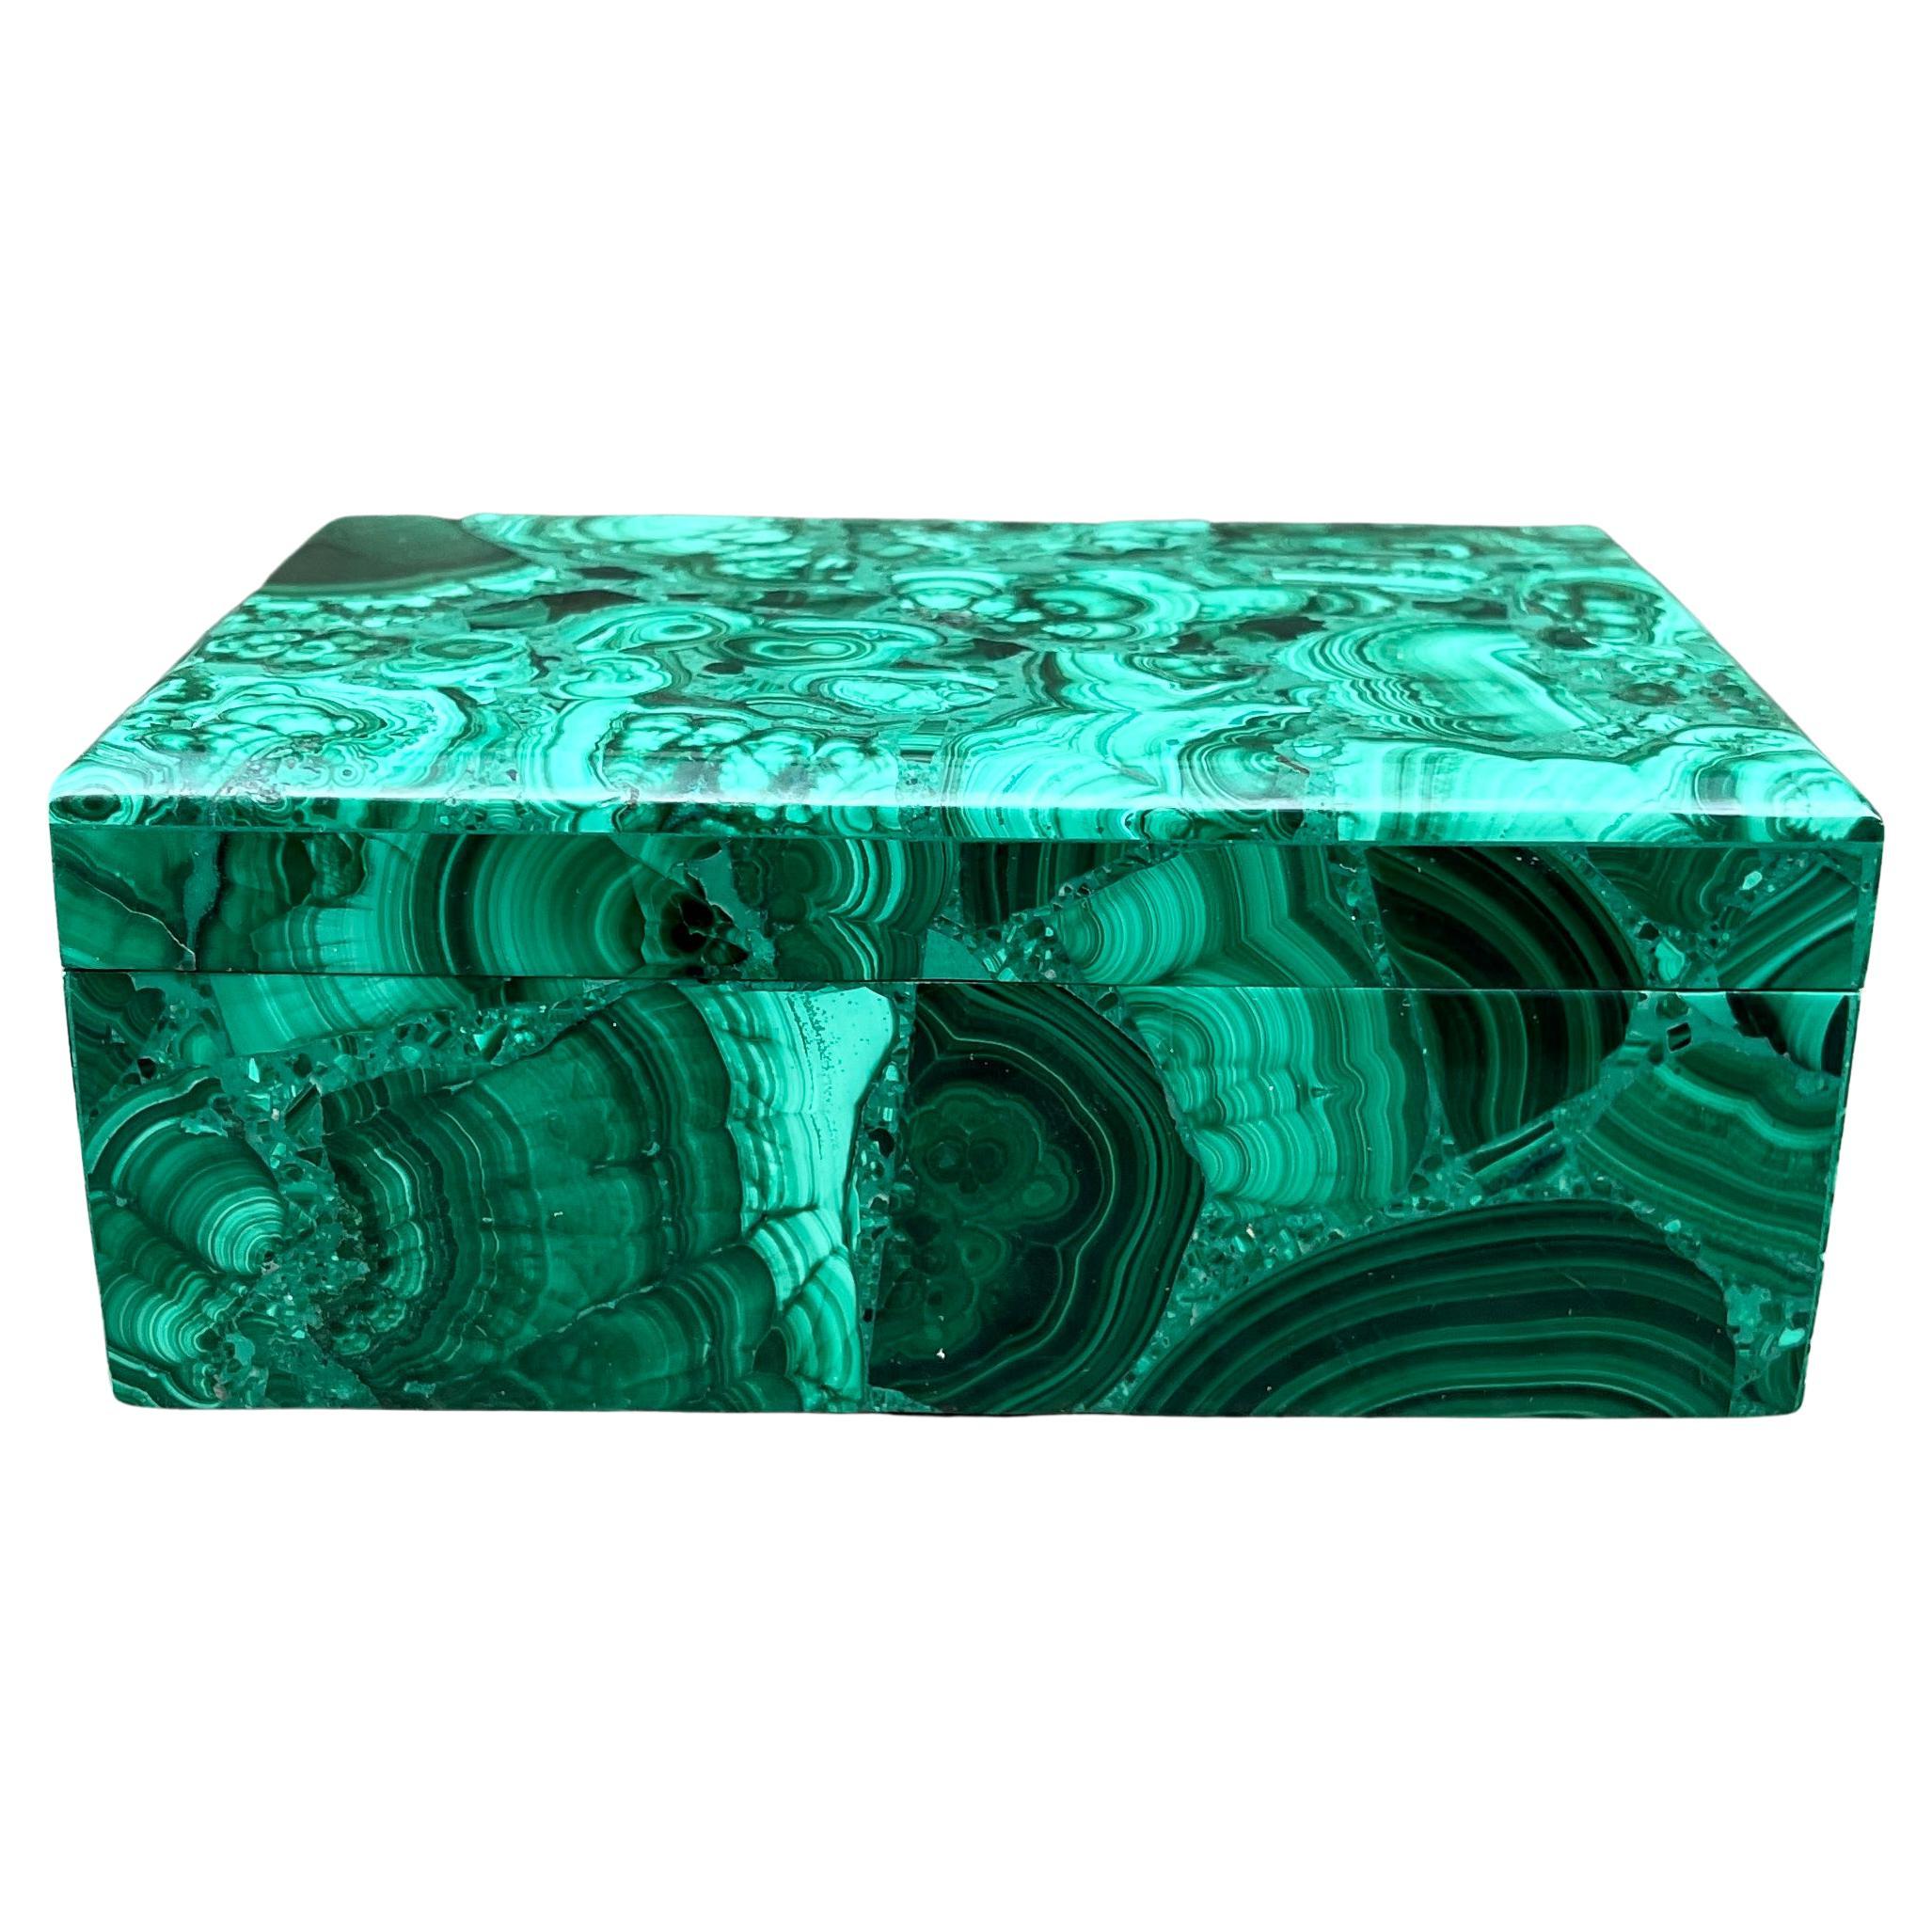 Large Malachite Jewelry or Vanity Box. Malachite is a green copper carbonate mineral. It is part of the monolithic crystal system and has a silky luster. The malachite for this box was sourced from the Congo, where the finest quality of this mineral